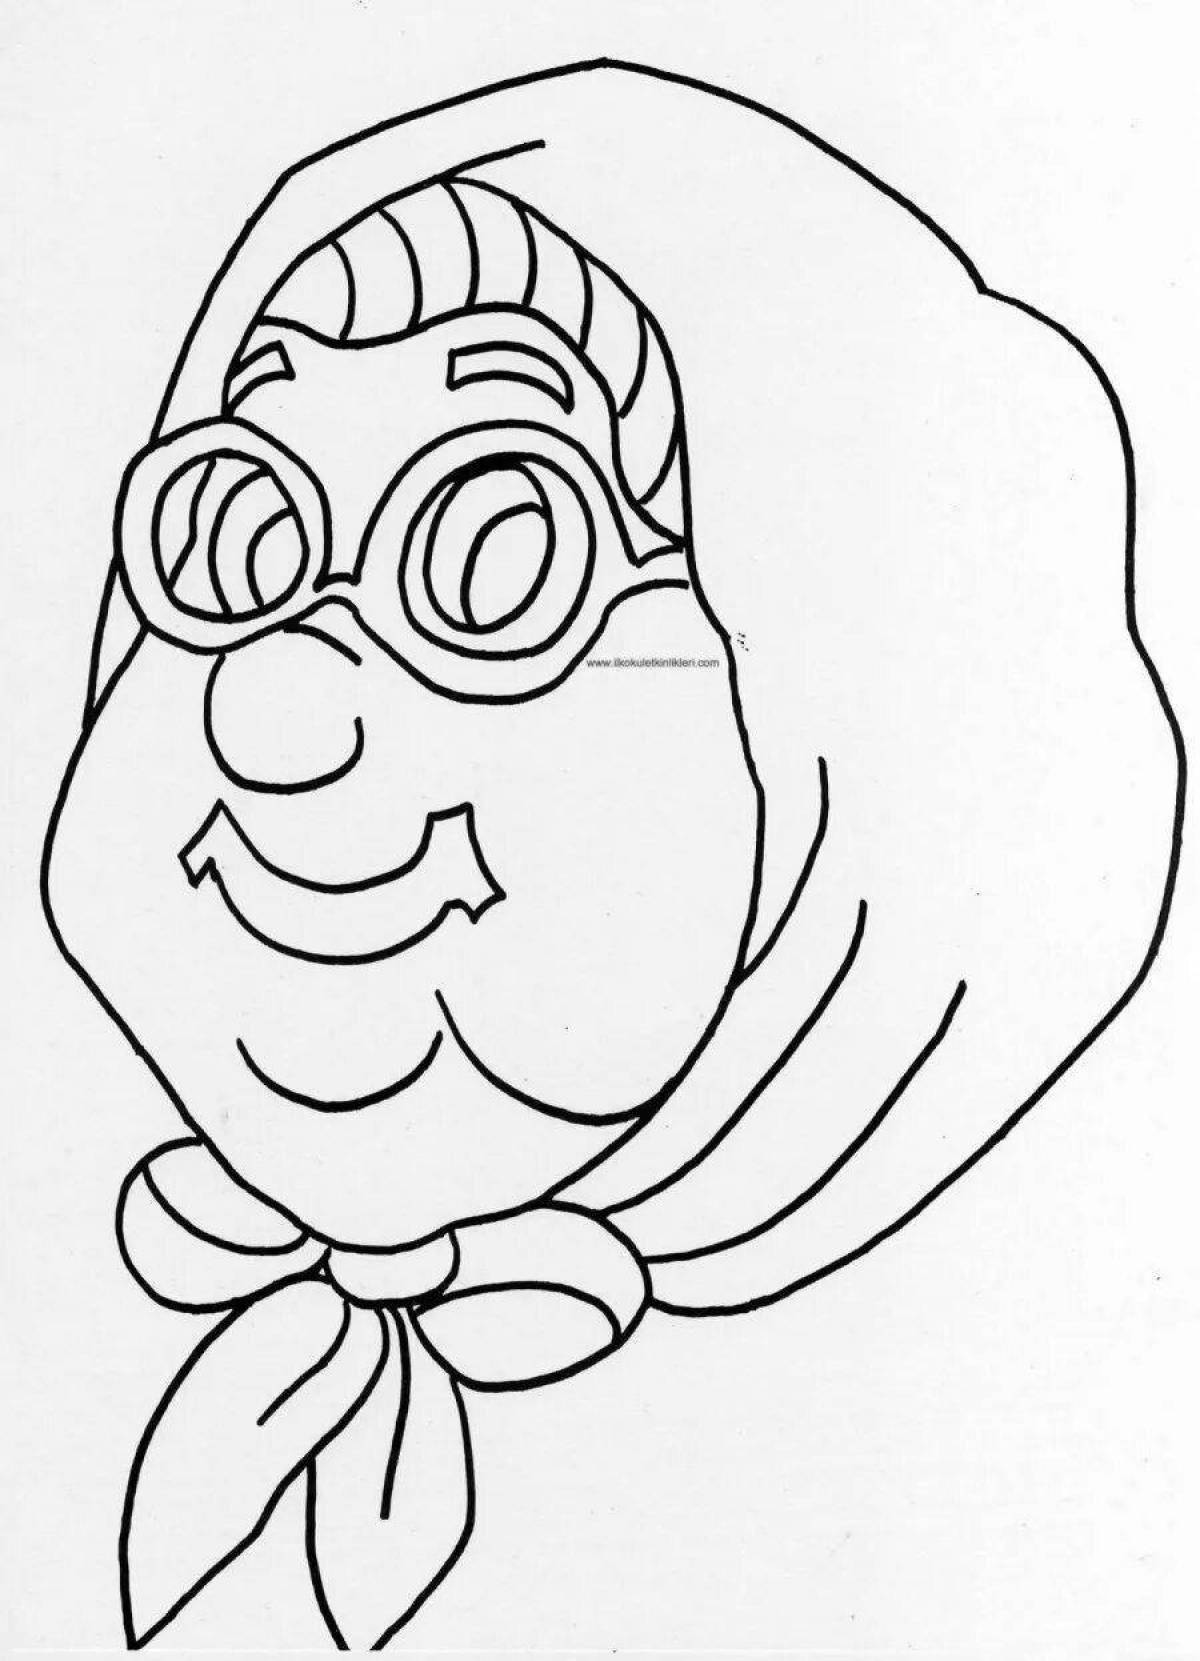 Bright grandmother portrait coloring page